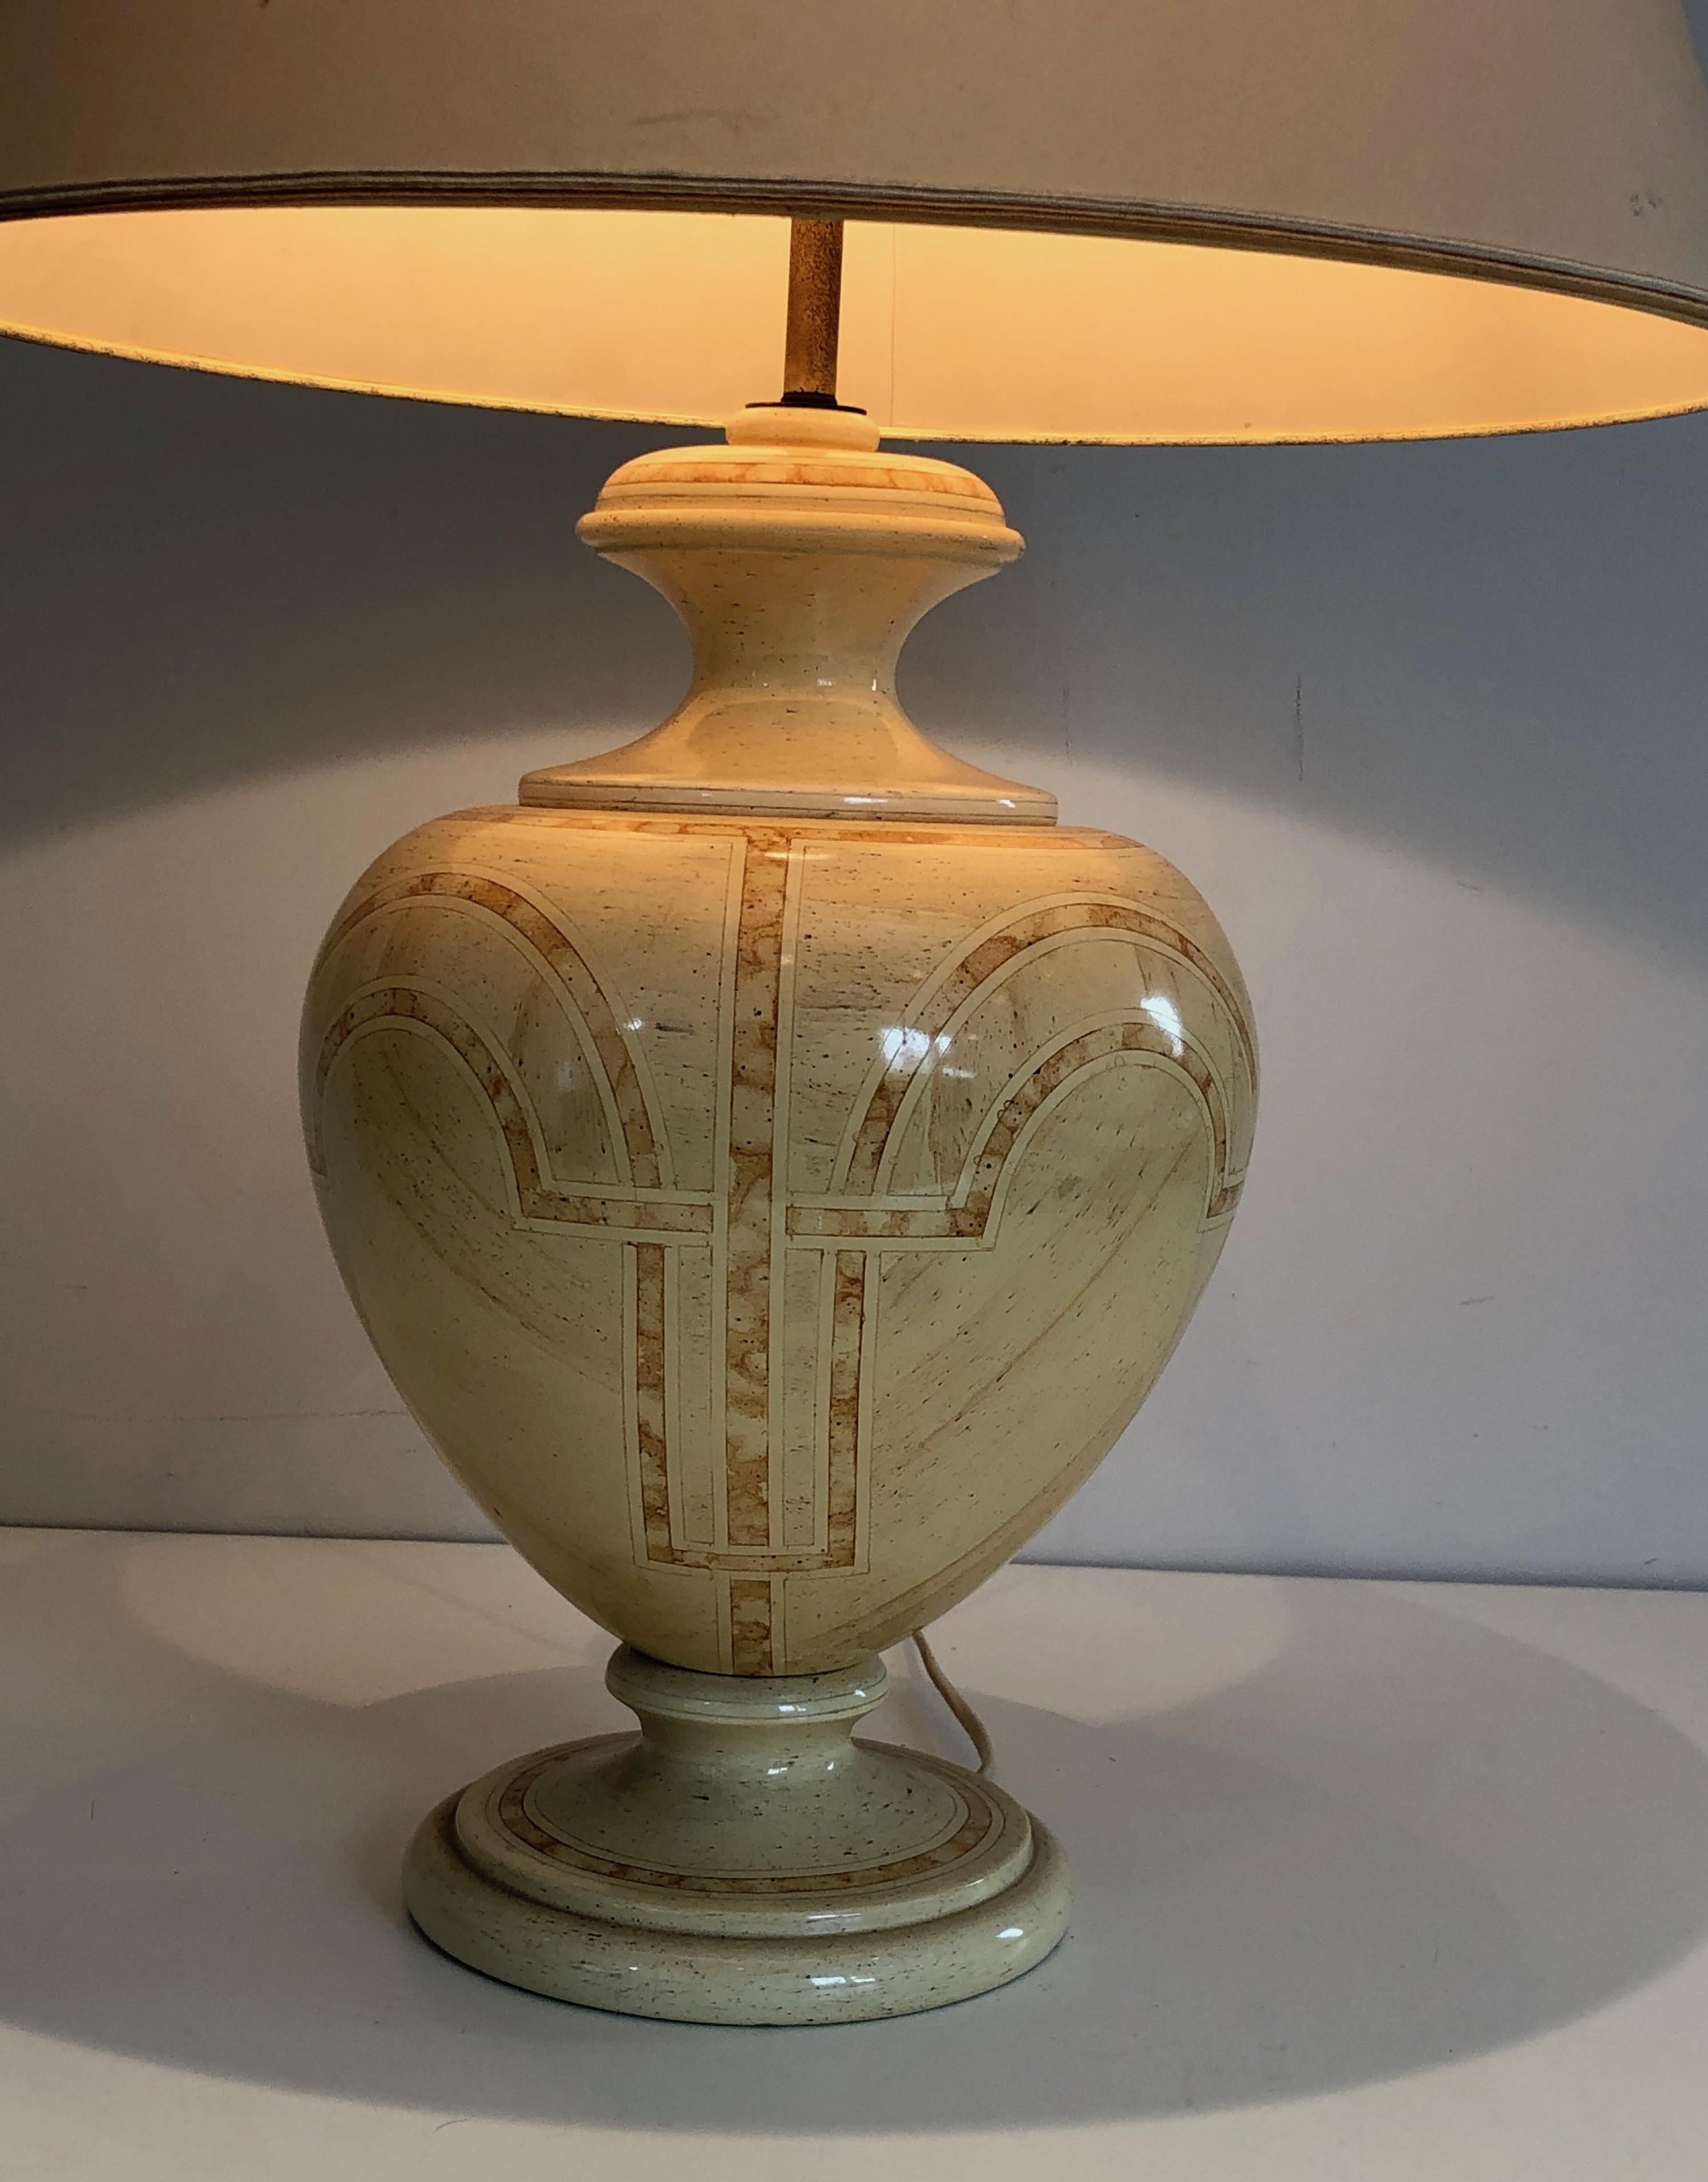 Wood Eggshell Lacquered Table Lamp with Interlacing Decors, French Work, circa 1970 For Sale